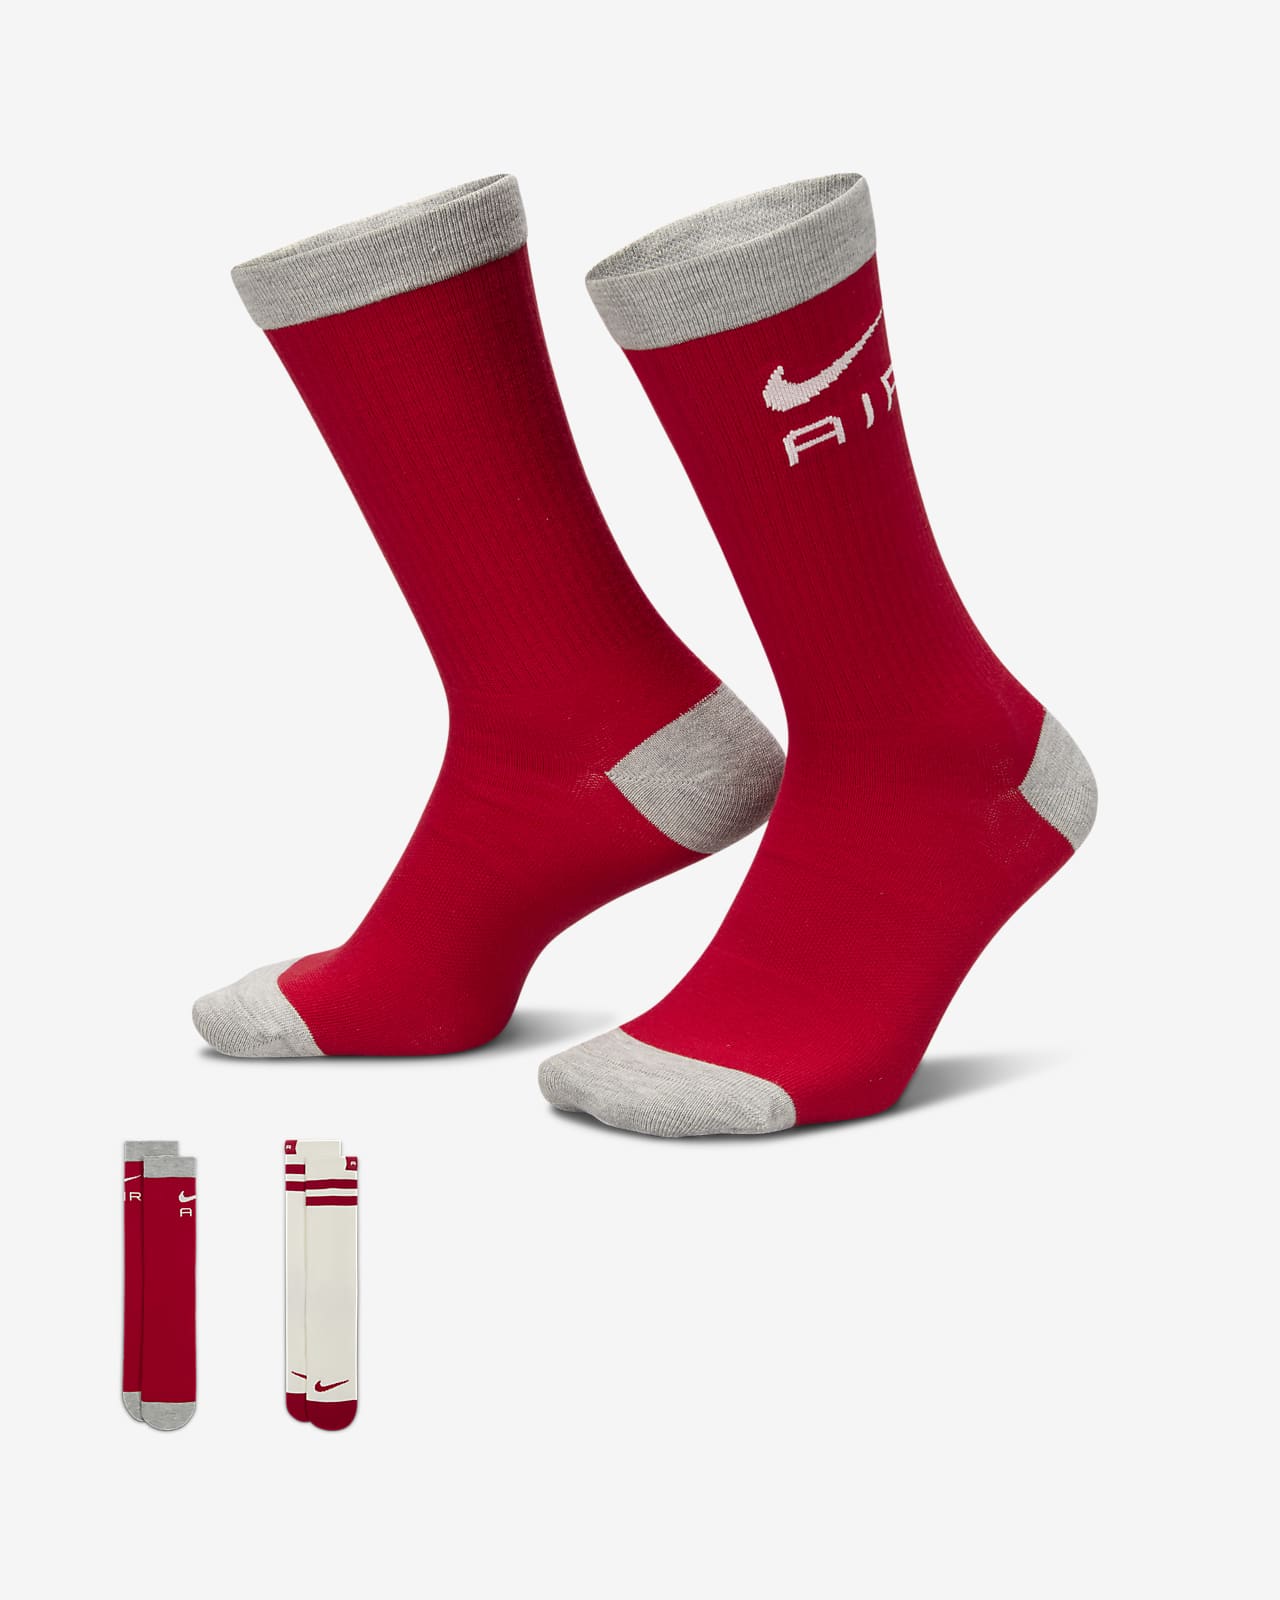 Chaussettes mi-mollet Nike Everyday Essentials (2 paires)